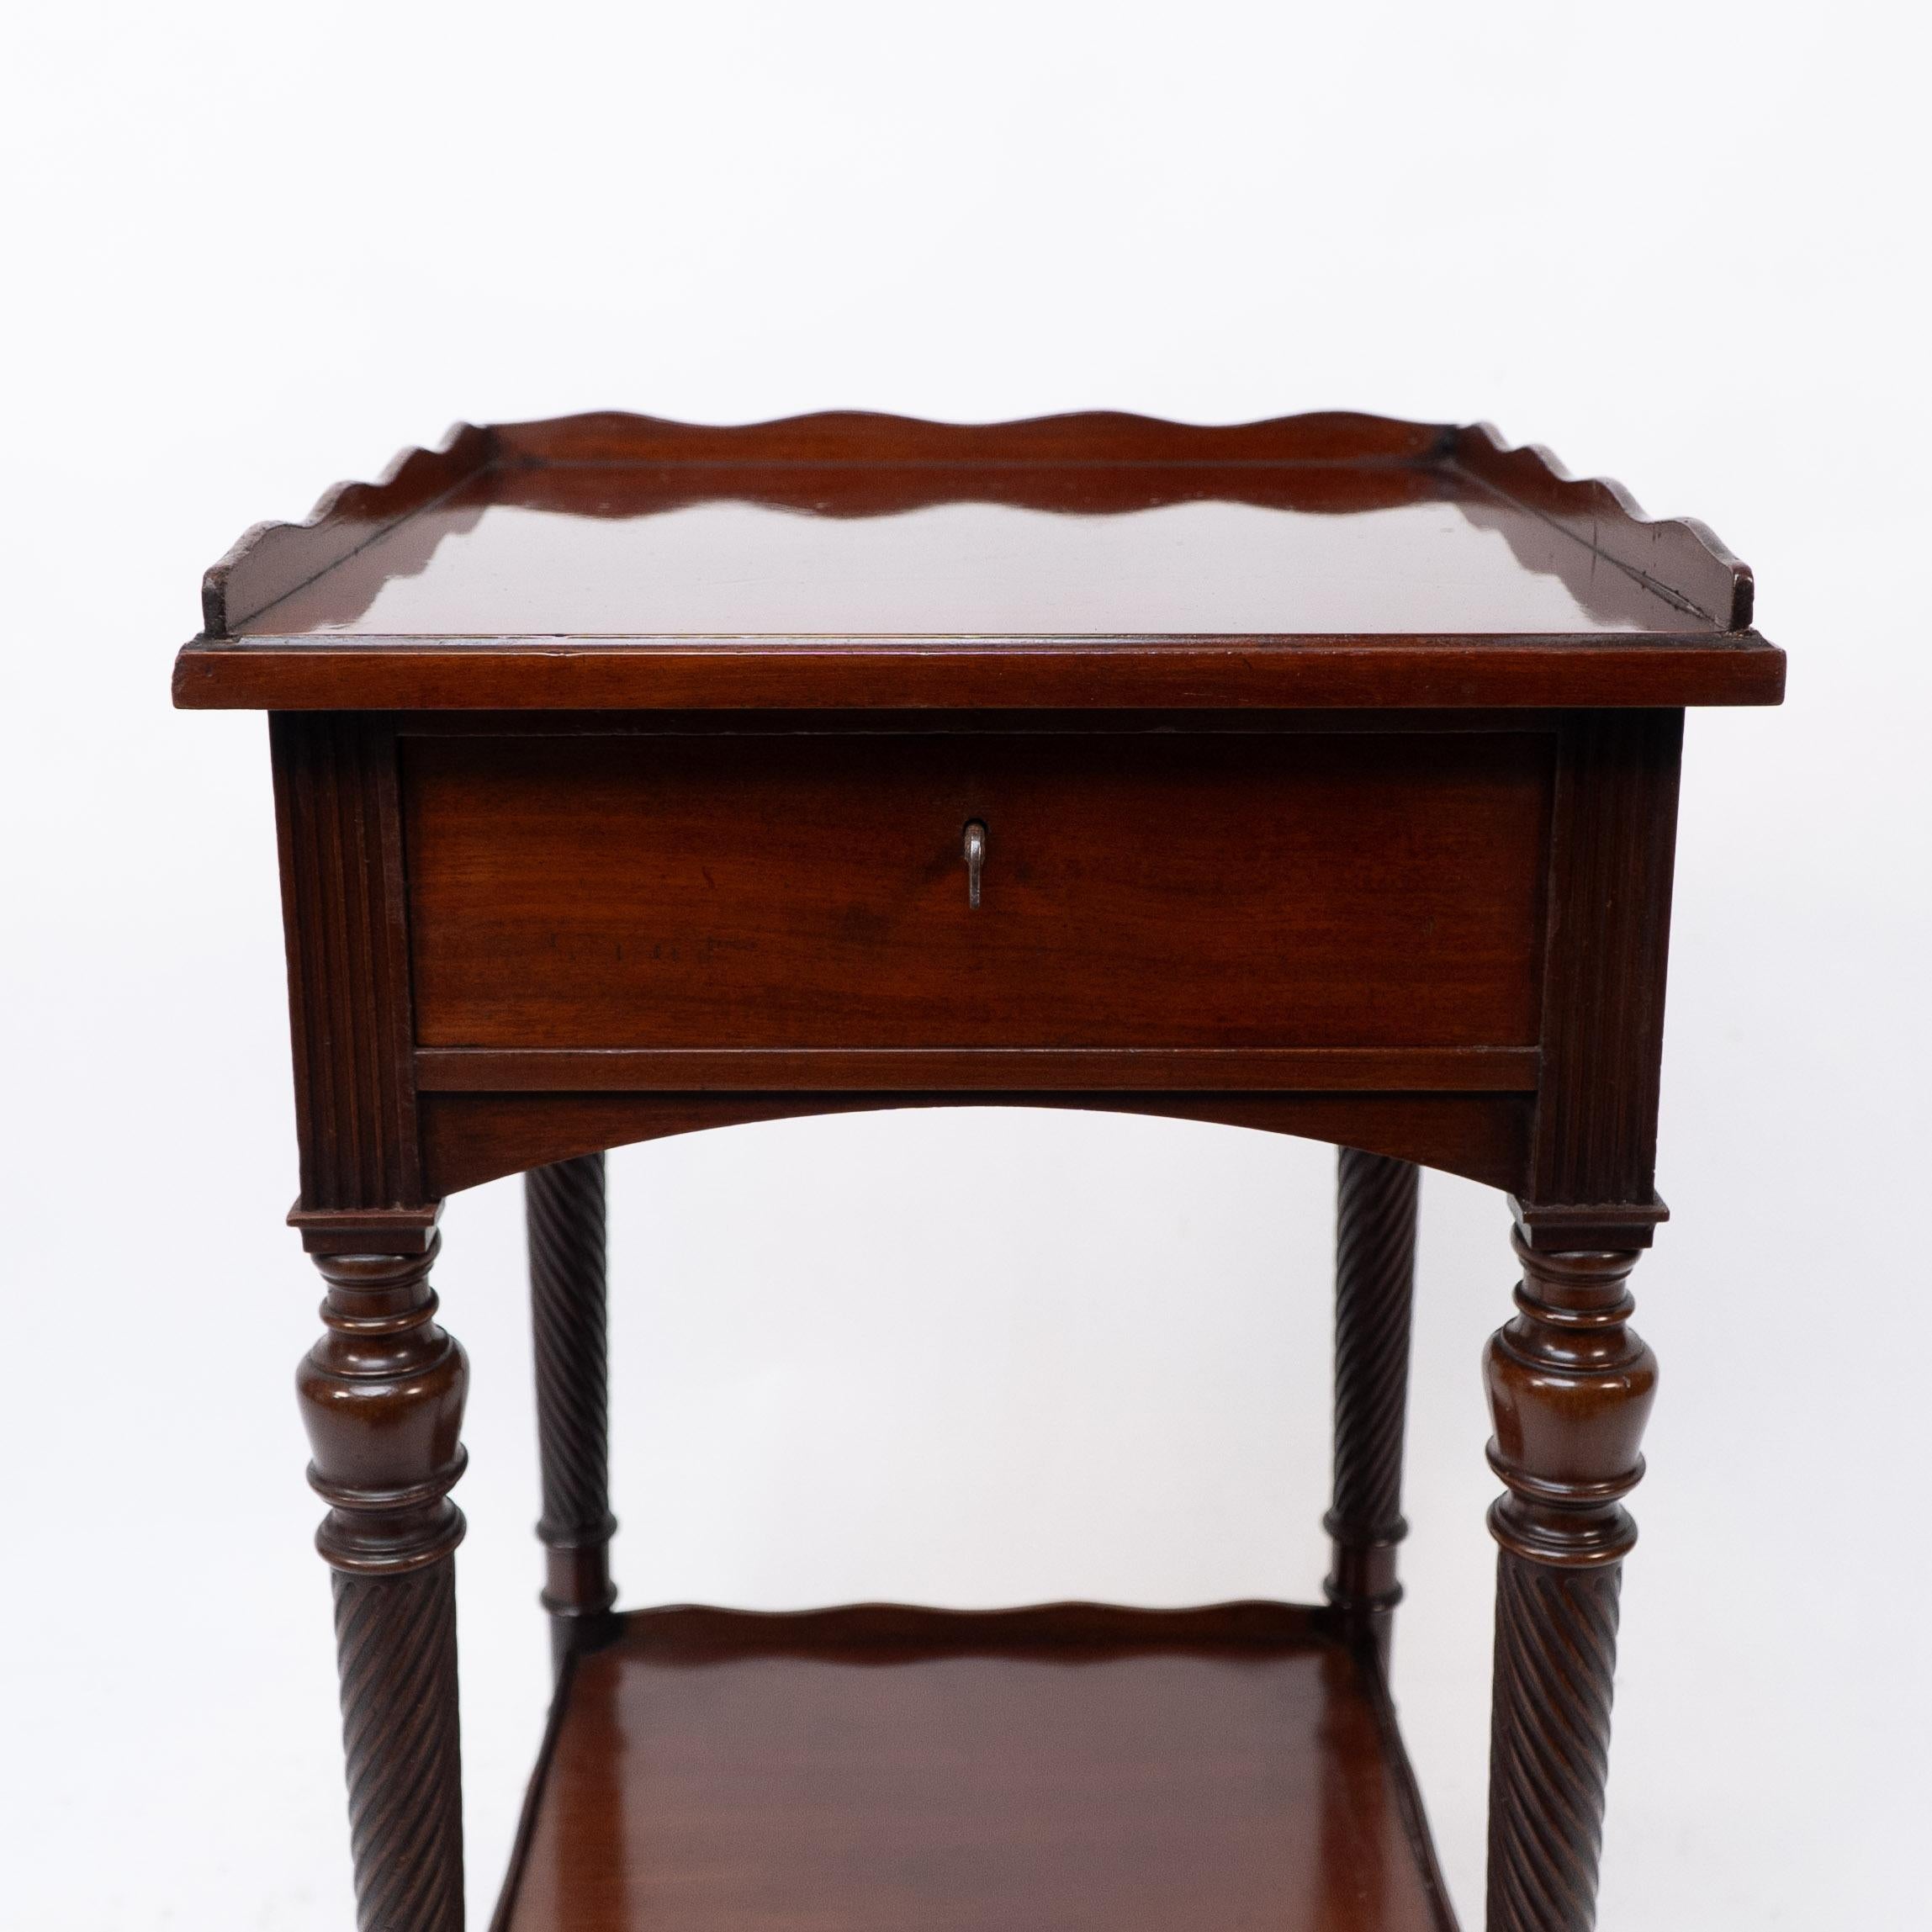 E W Godwin attr, for Collinson & Lock. An Aesthetic Movement mahogany side table For Sale 1